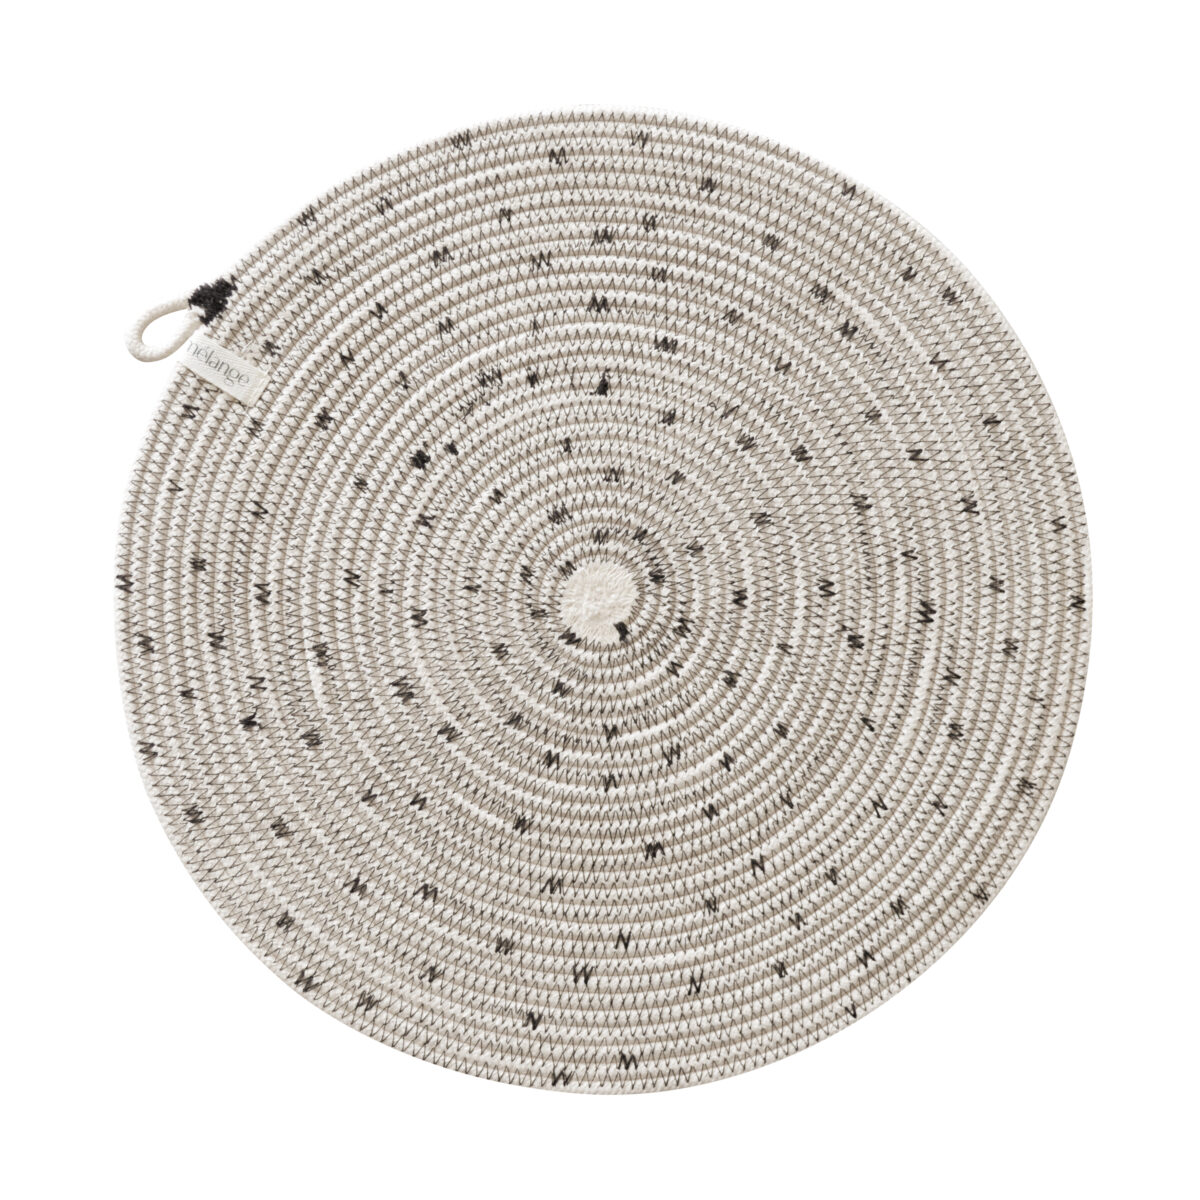 Placemat - cotton rope